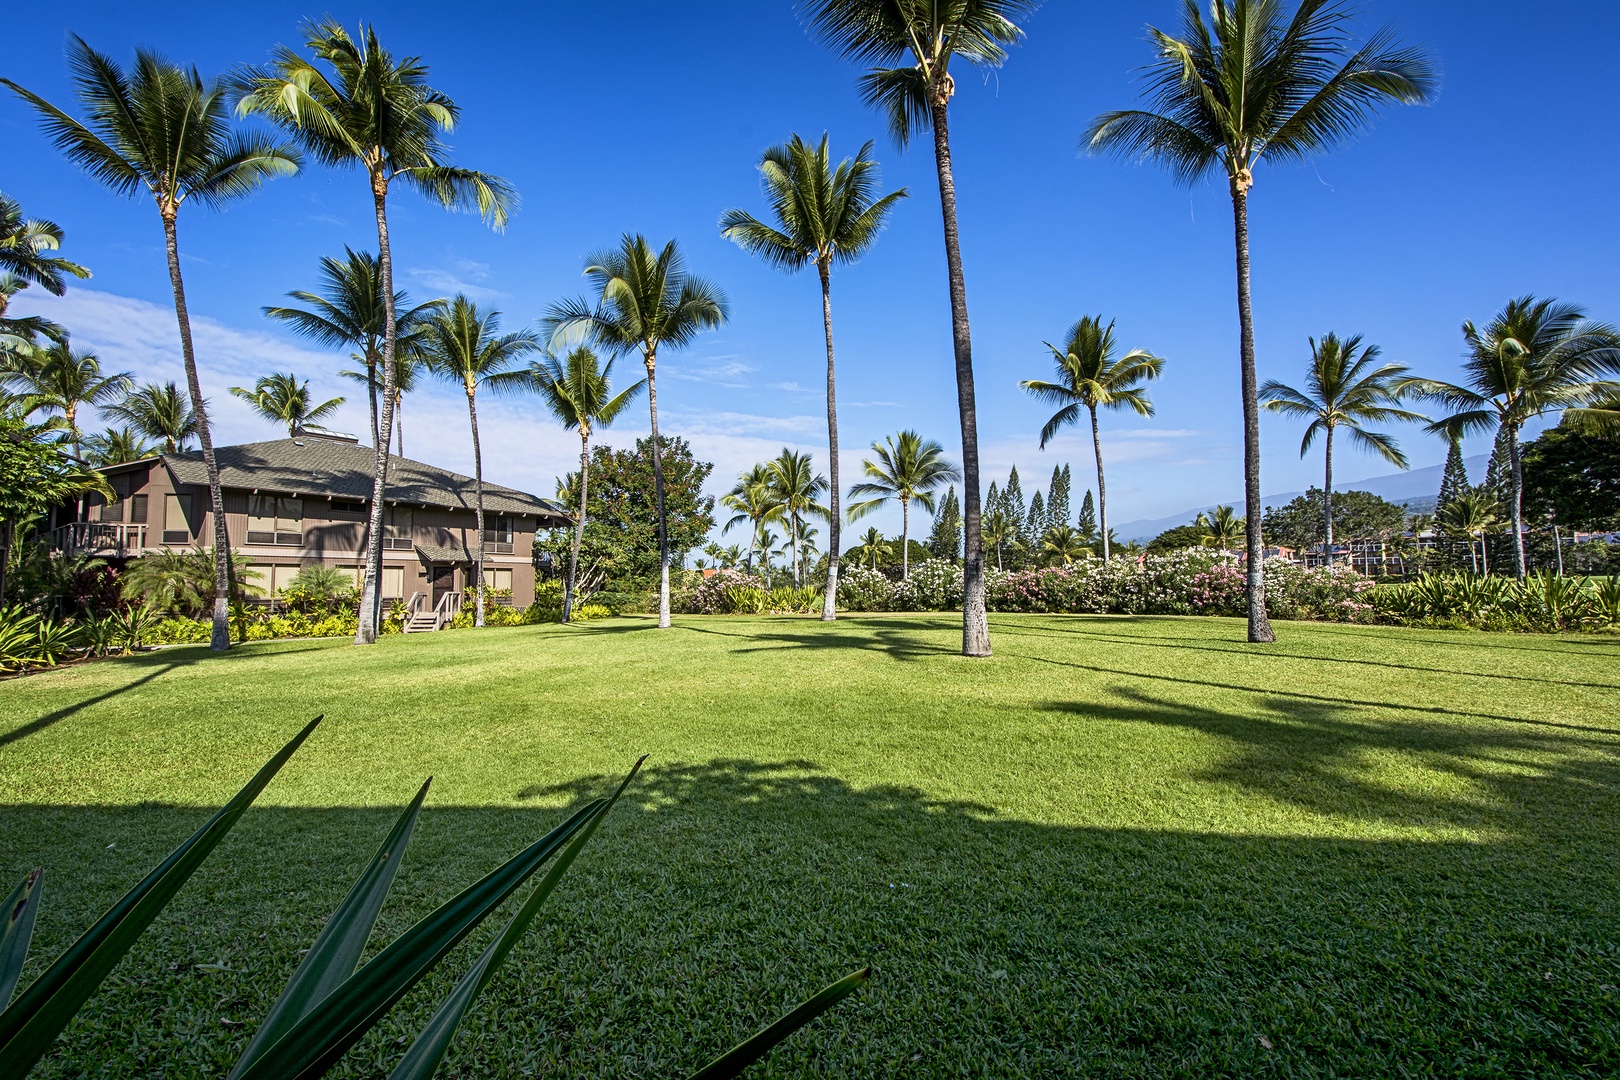 Kailua Kona Vacation Rentals, Kanaloa 701 - Visit the famous farmers market. Enjoy a shave ice or a cup of Kona coffee. Dine on a light snack or a gourmet meal, buy an inexpensive souvenir or a piece of fine art, book an activity, go for a swim or hang out at the beach.